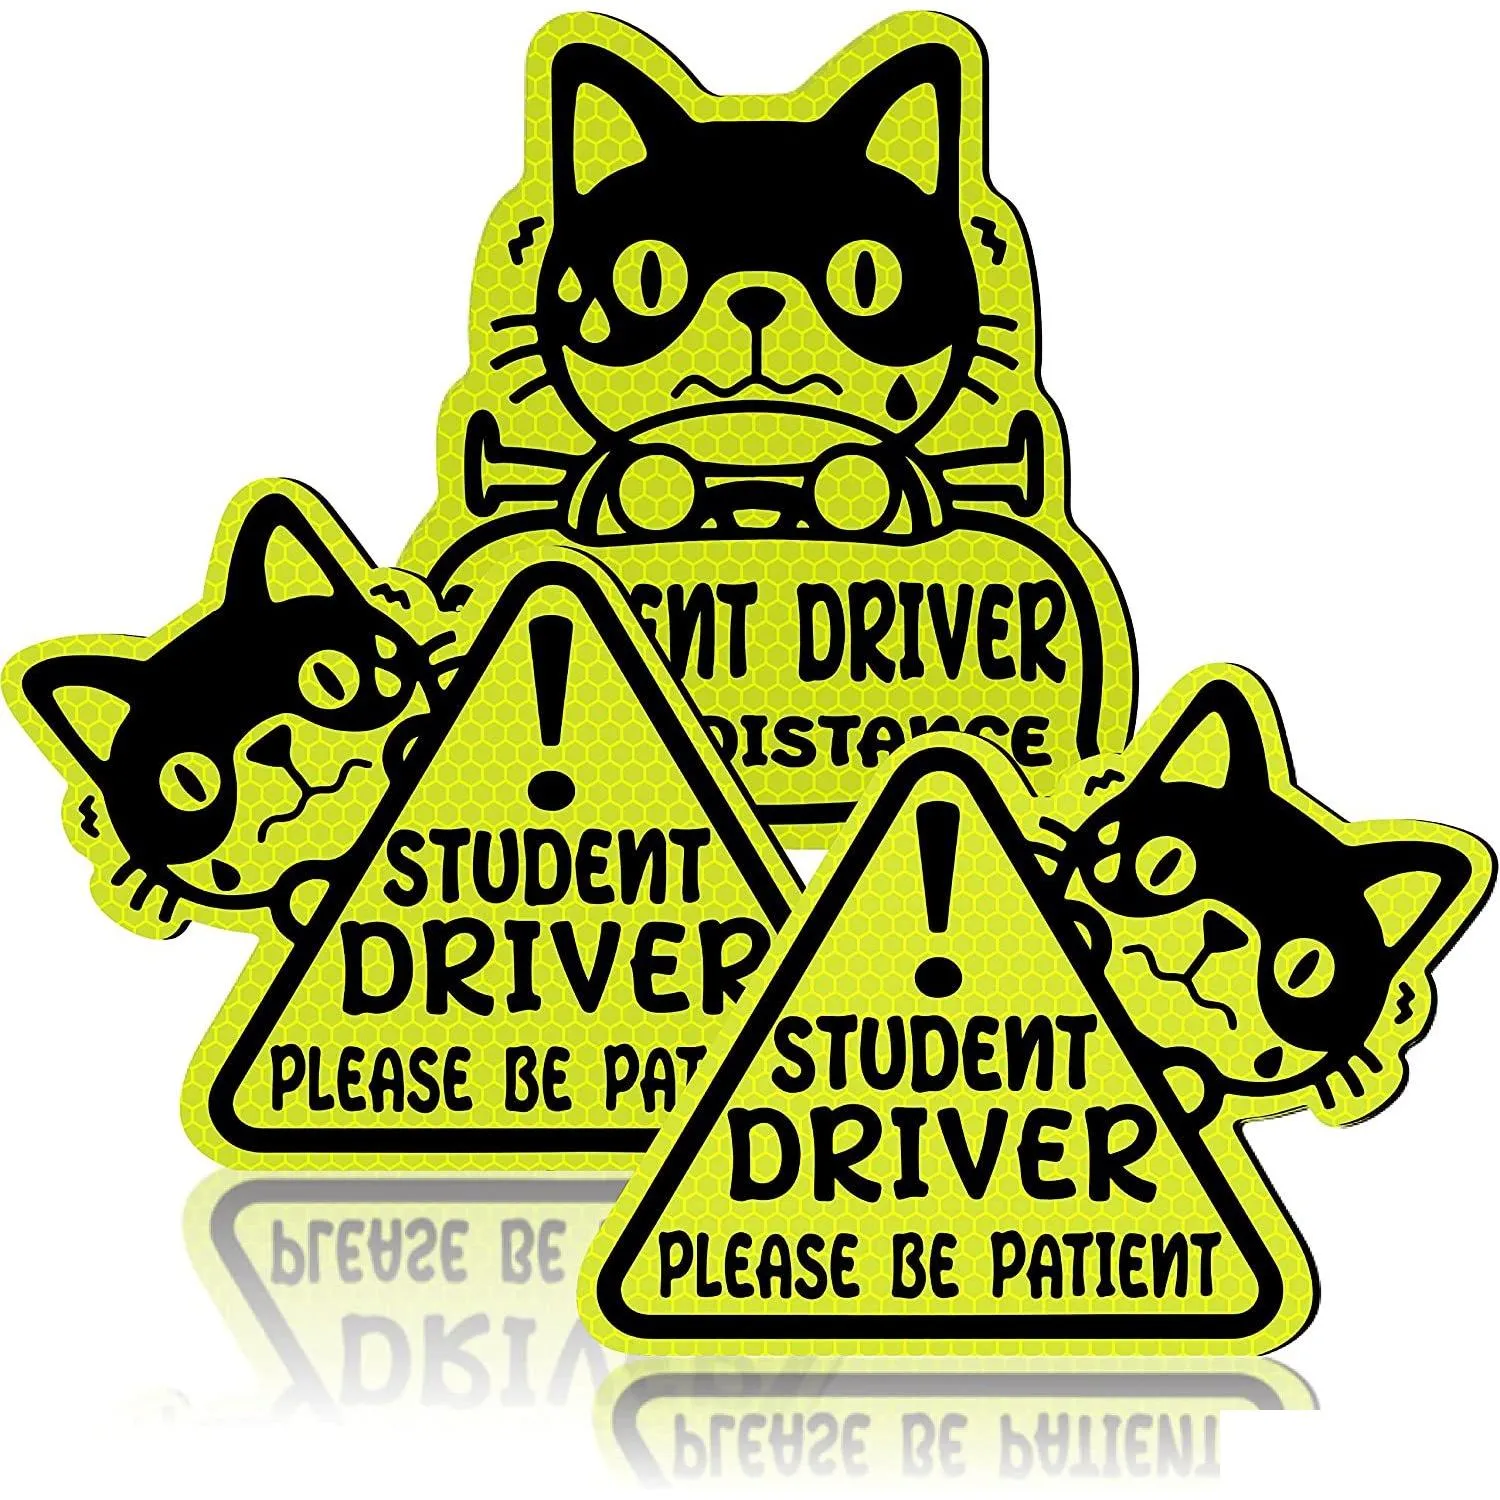 reflective student driver magnet for car driver sticker please be patient sign keep distance sticker decal automotive magnets safety sign magnet vehicle